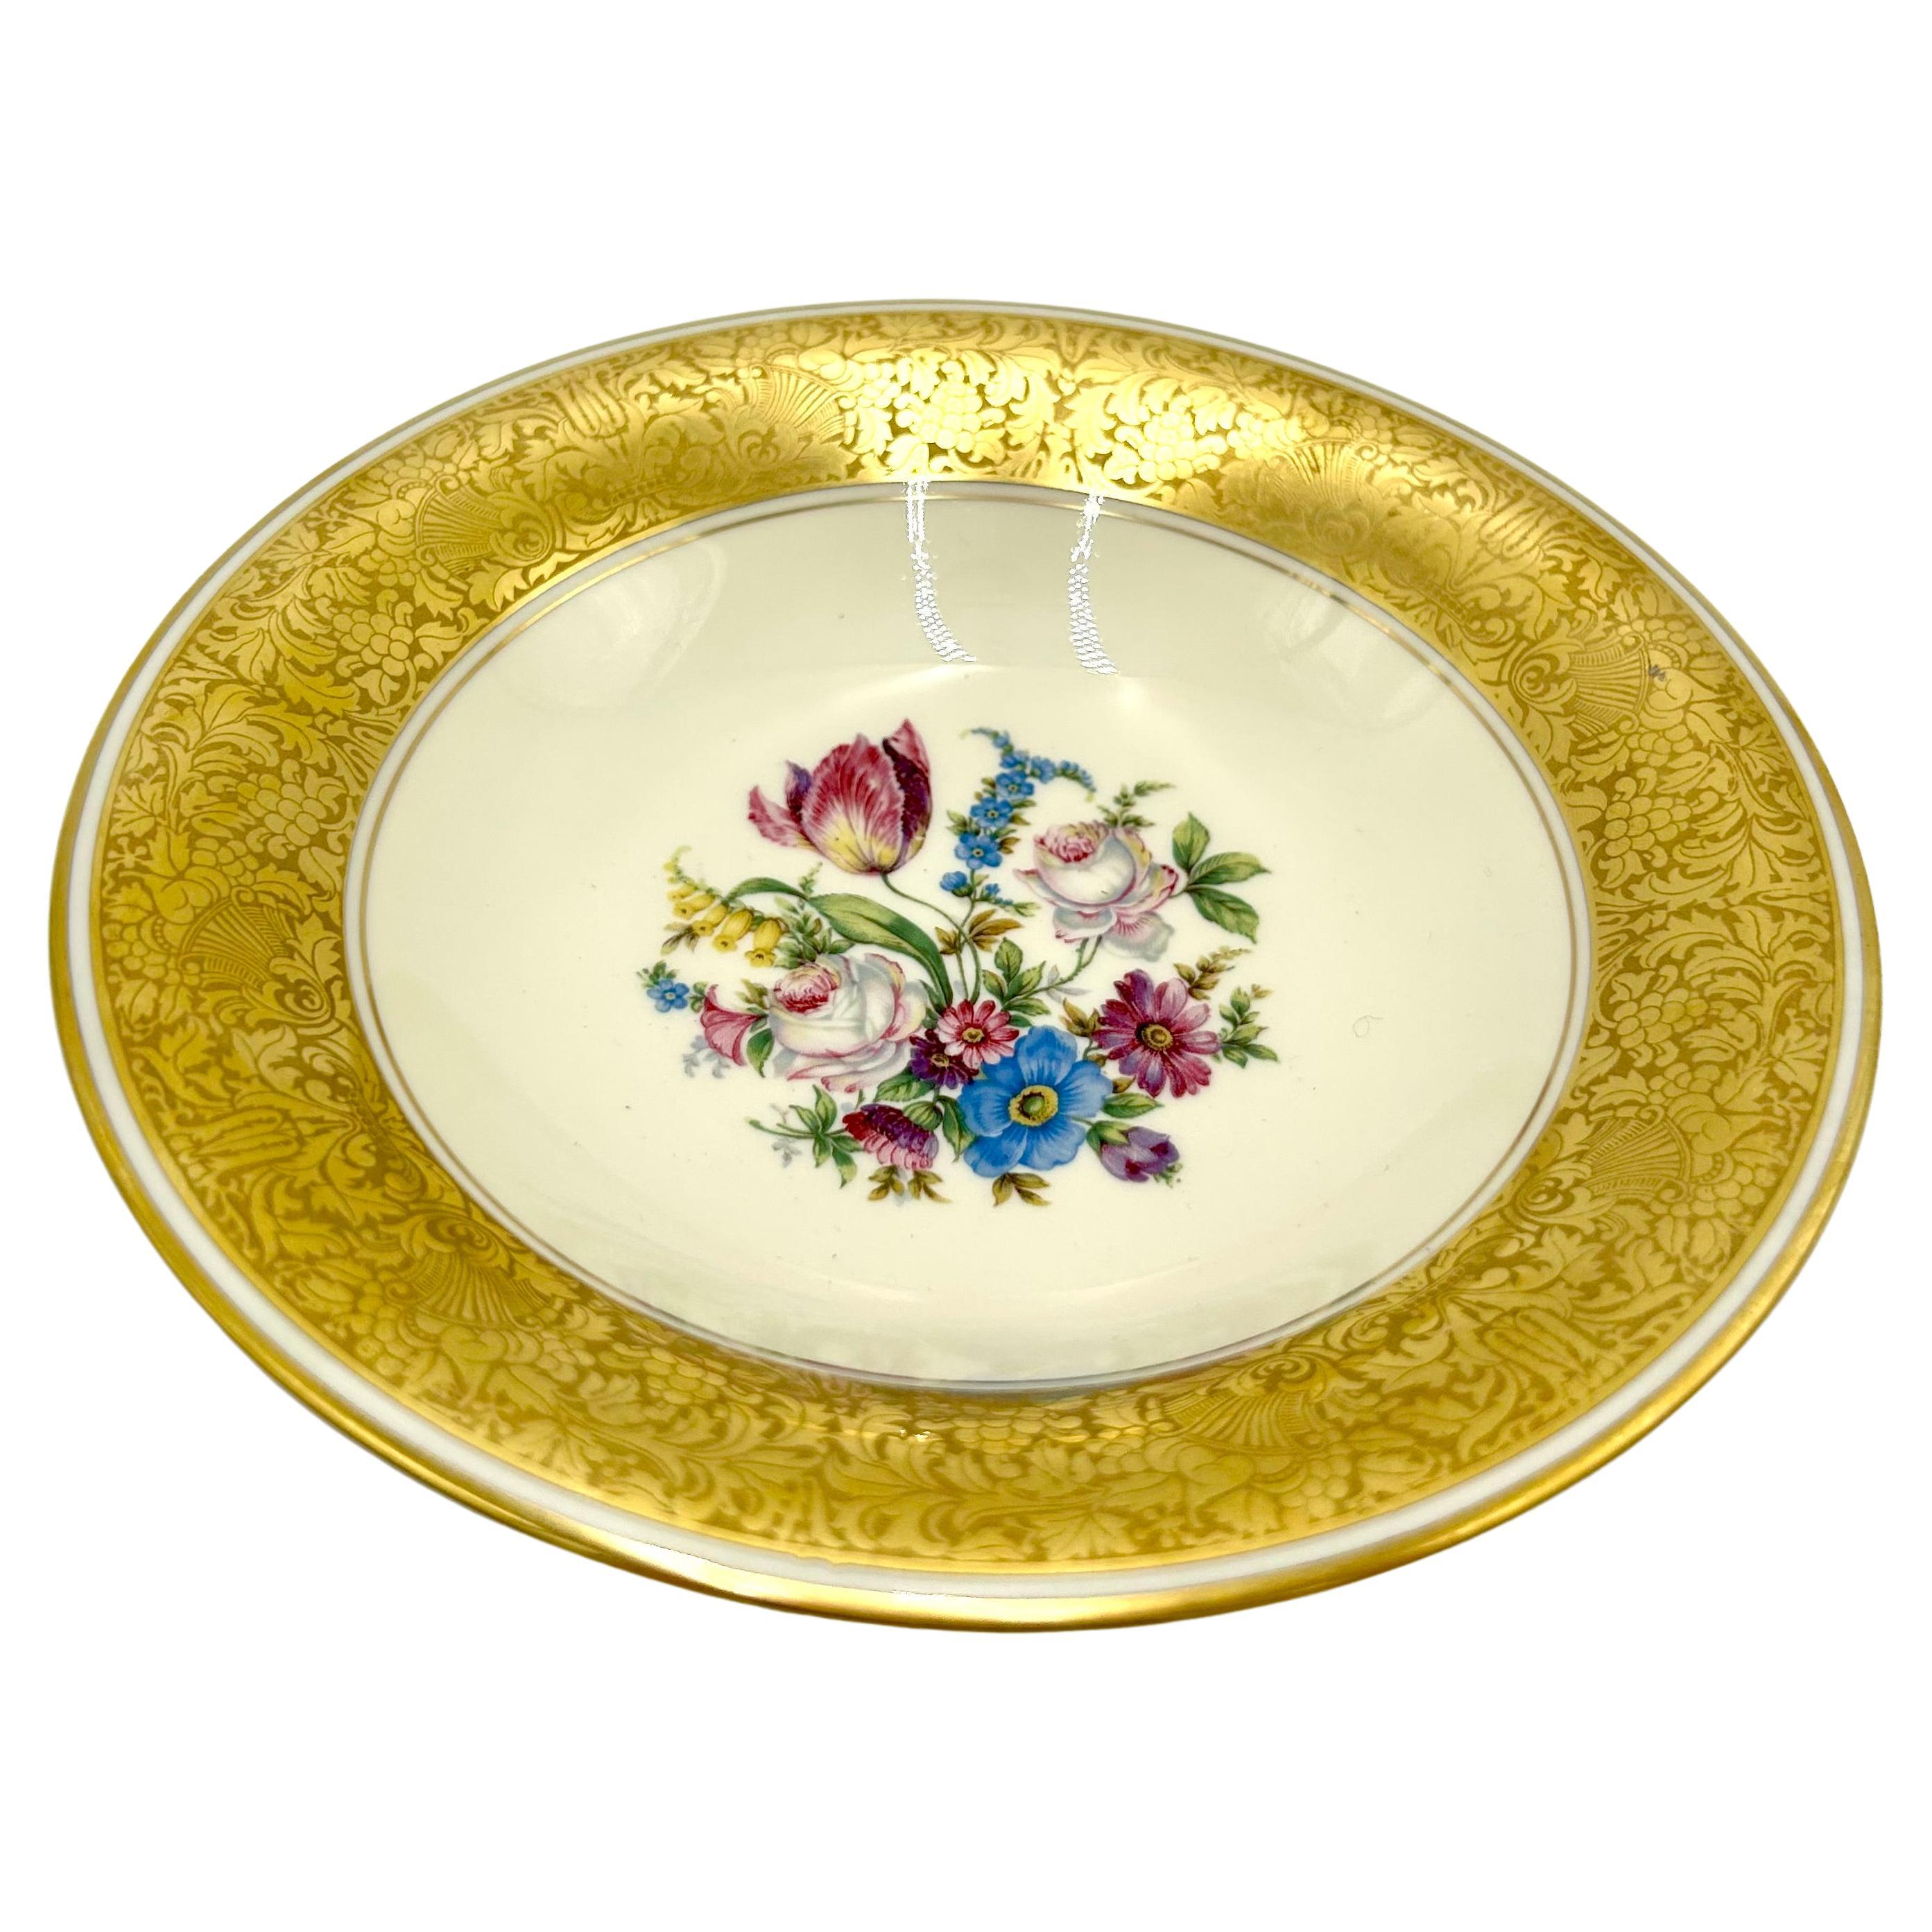 Platter with Gilding, Rosenthal, Germany, 1950